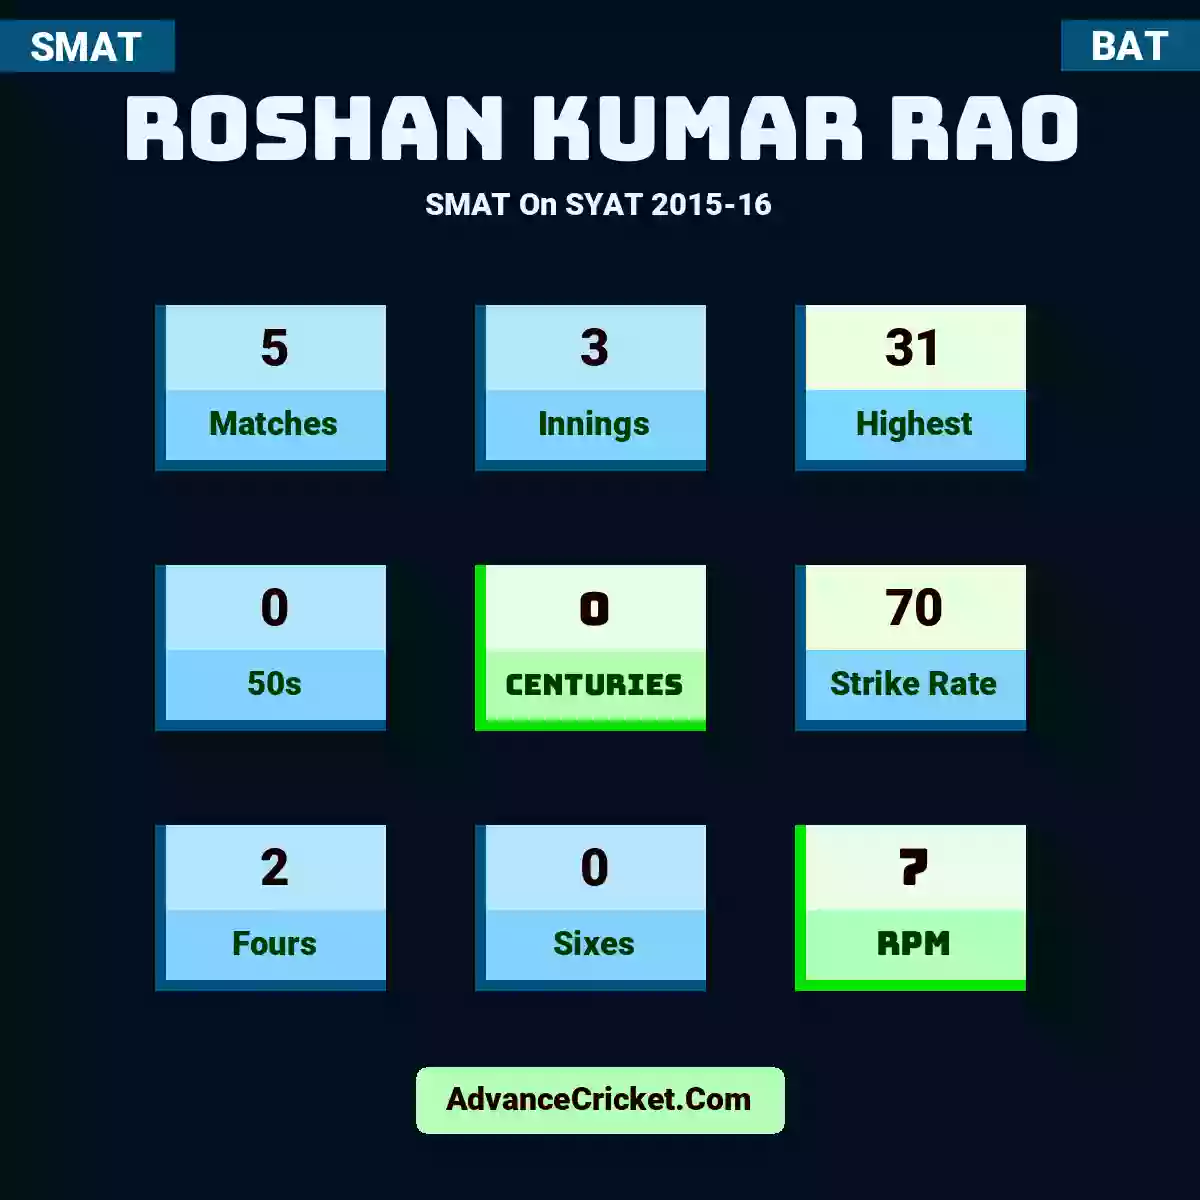 Roshan Kumar Rao SMAT  On SYAT 2015-16, Roshan Kumar Rao played 5 matches, scored 31 runs as highest, 0 half-centuries, and 0 centuries, with a strike rate of 70. R.Rao hit 2 fours and 0 sixes, with an RPM of 7.